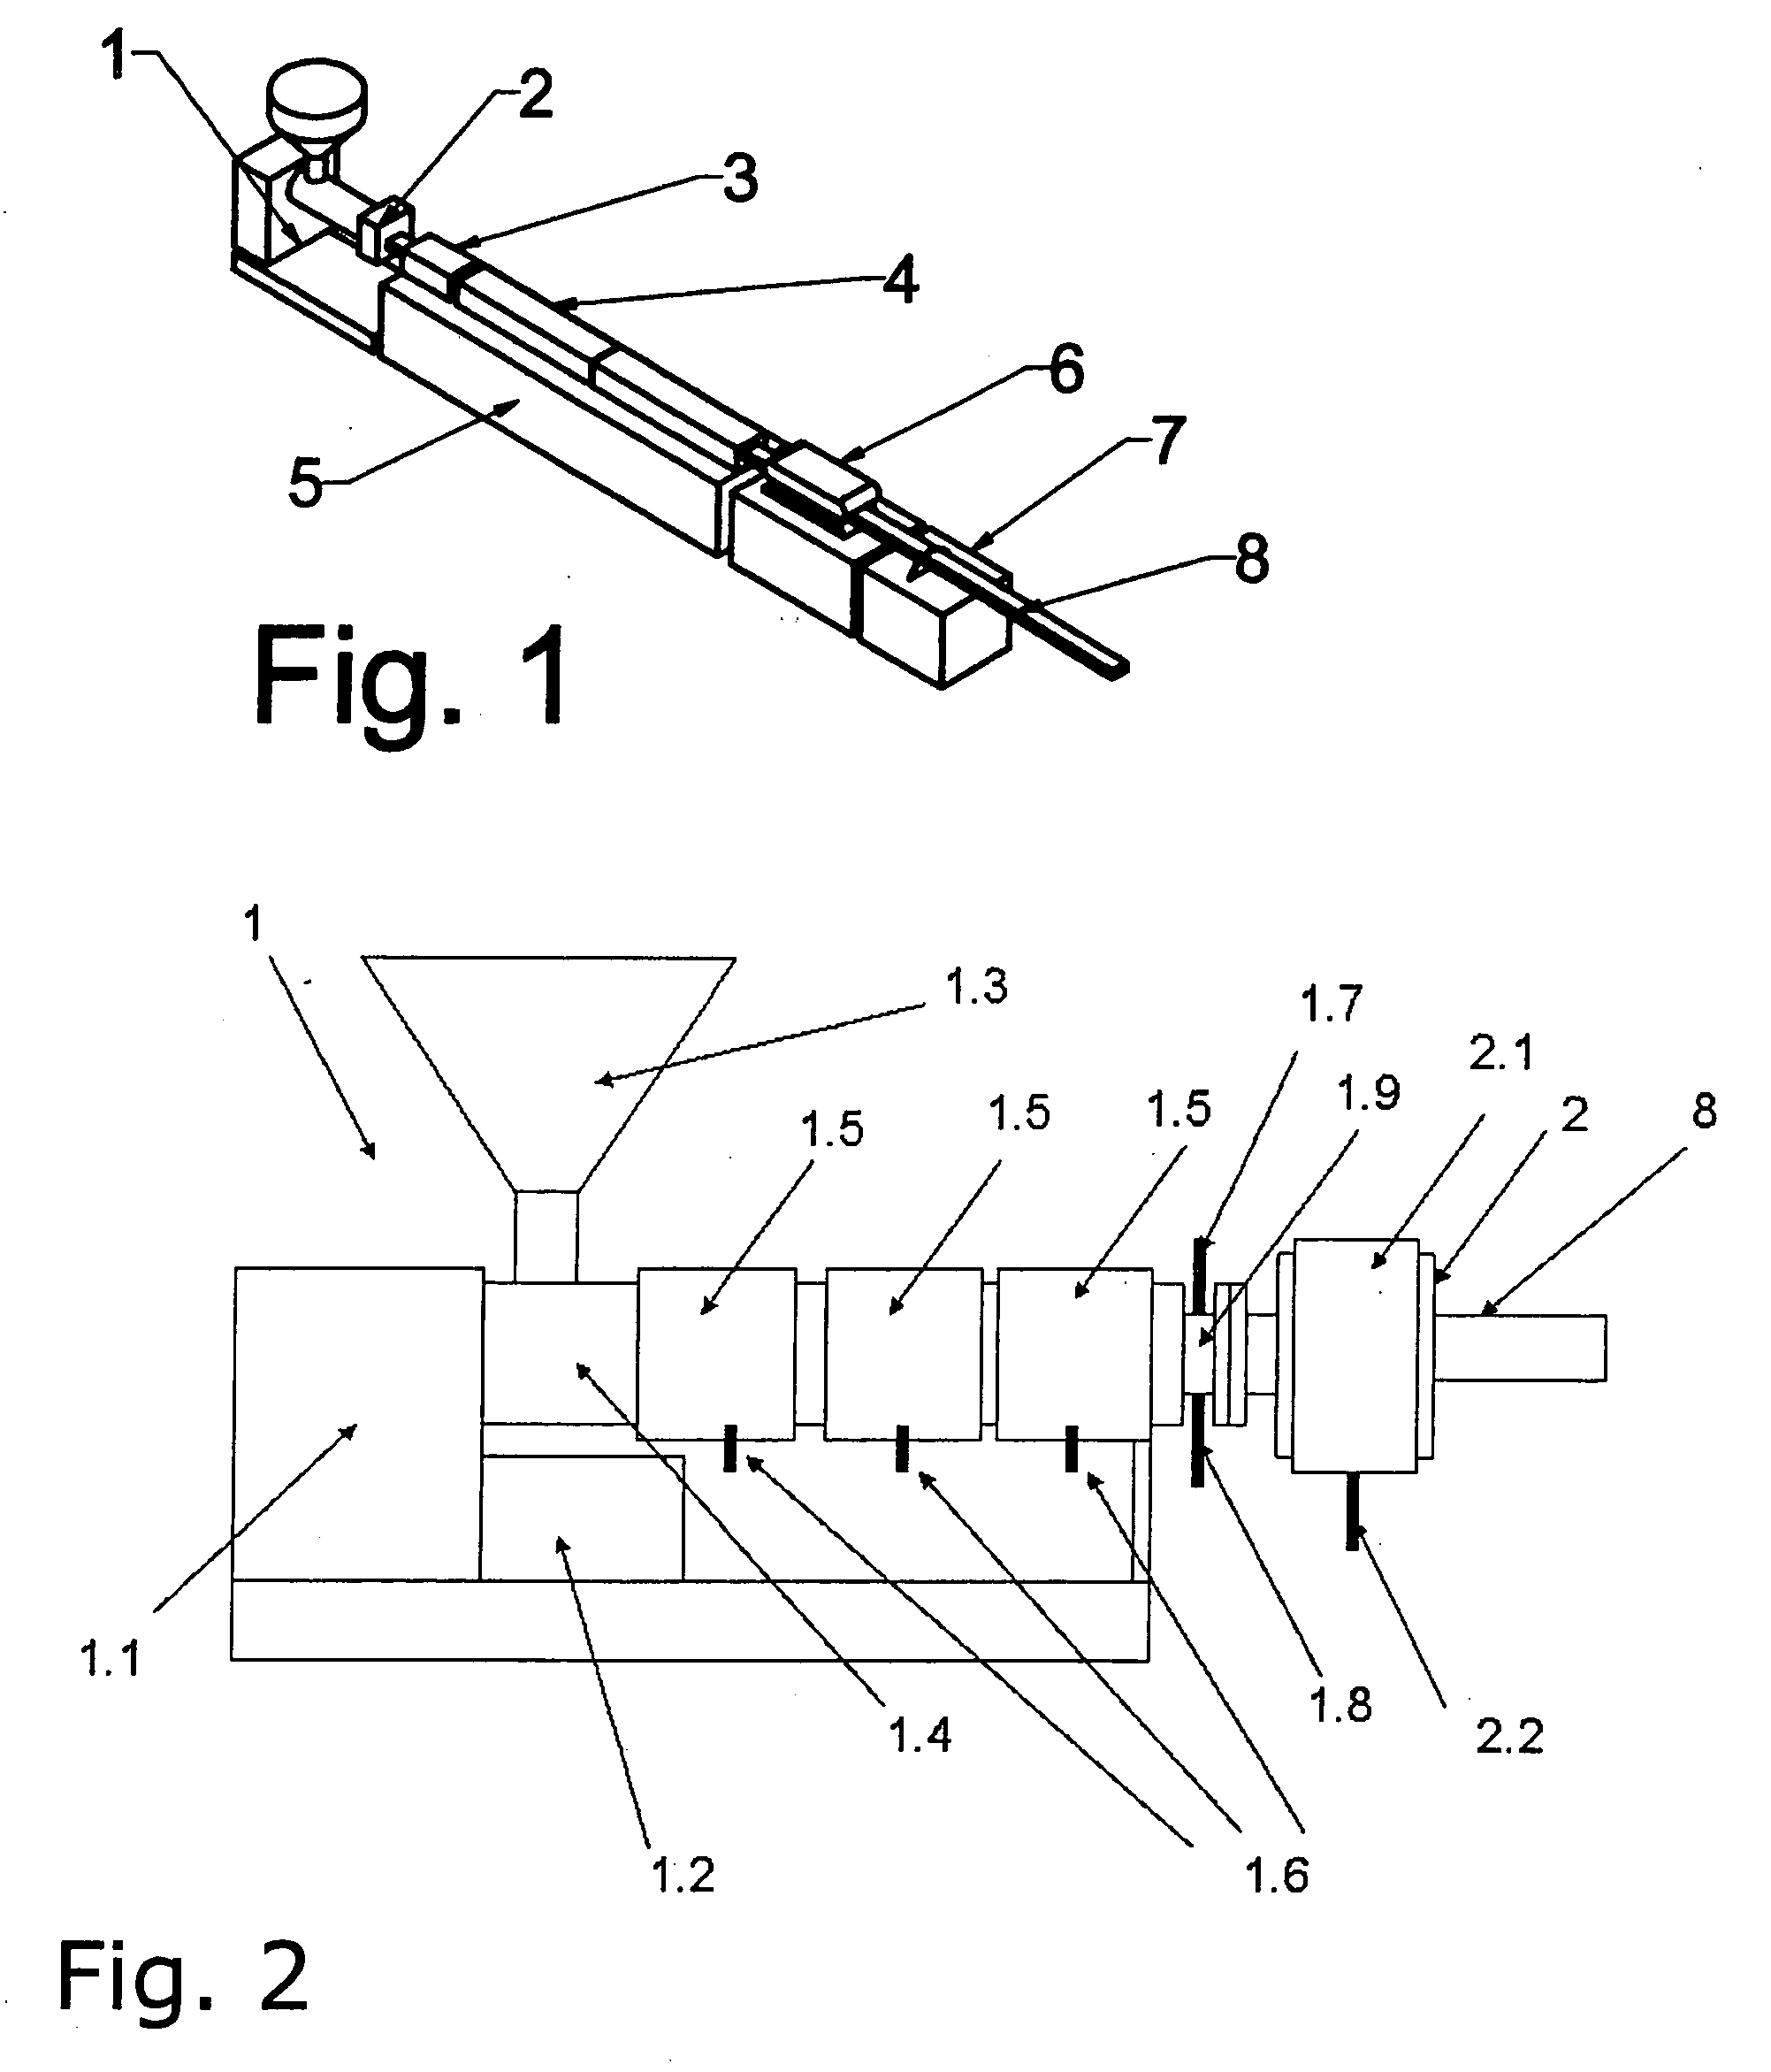 Method for producing profiles made of thermoplastic material